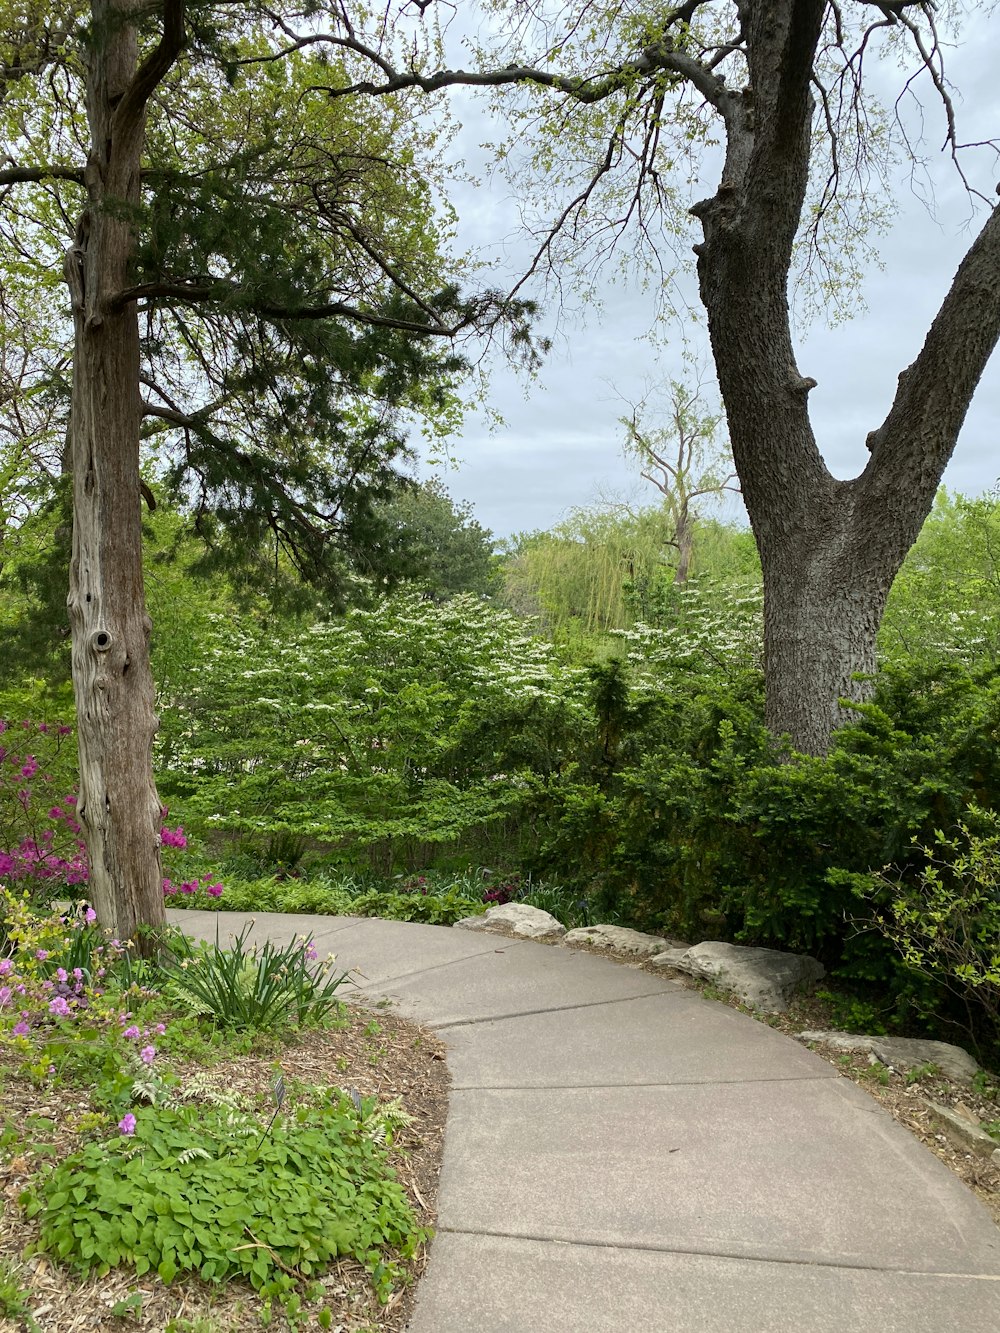 a path in a park with trees and flowers